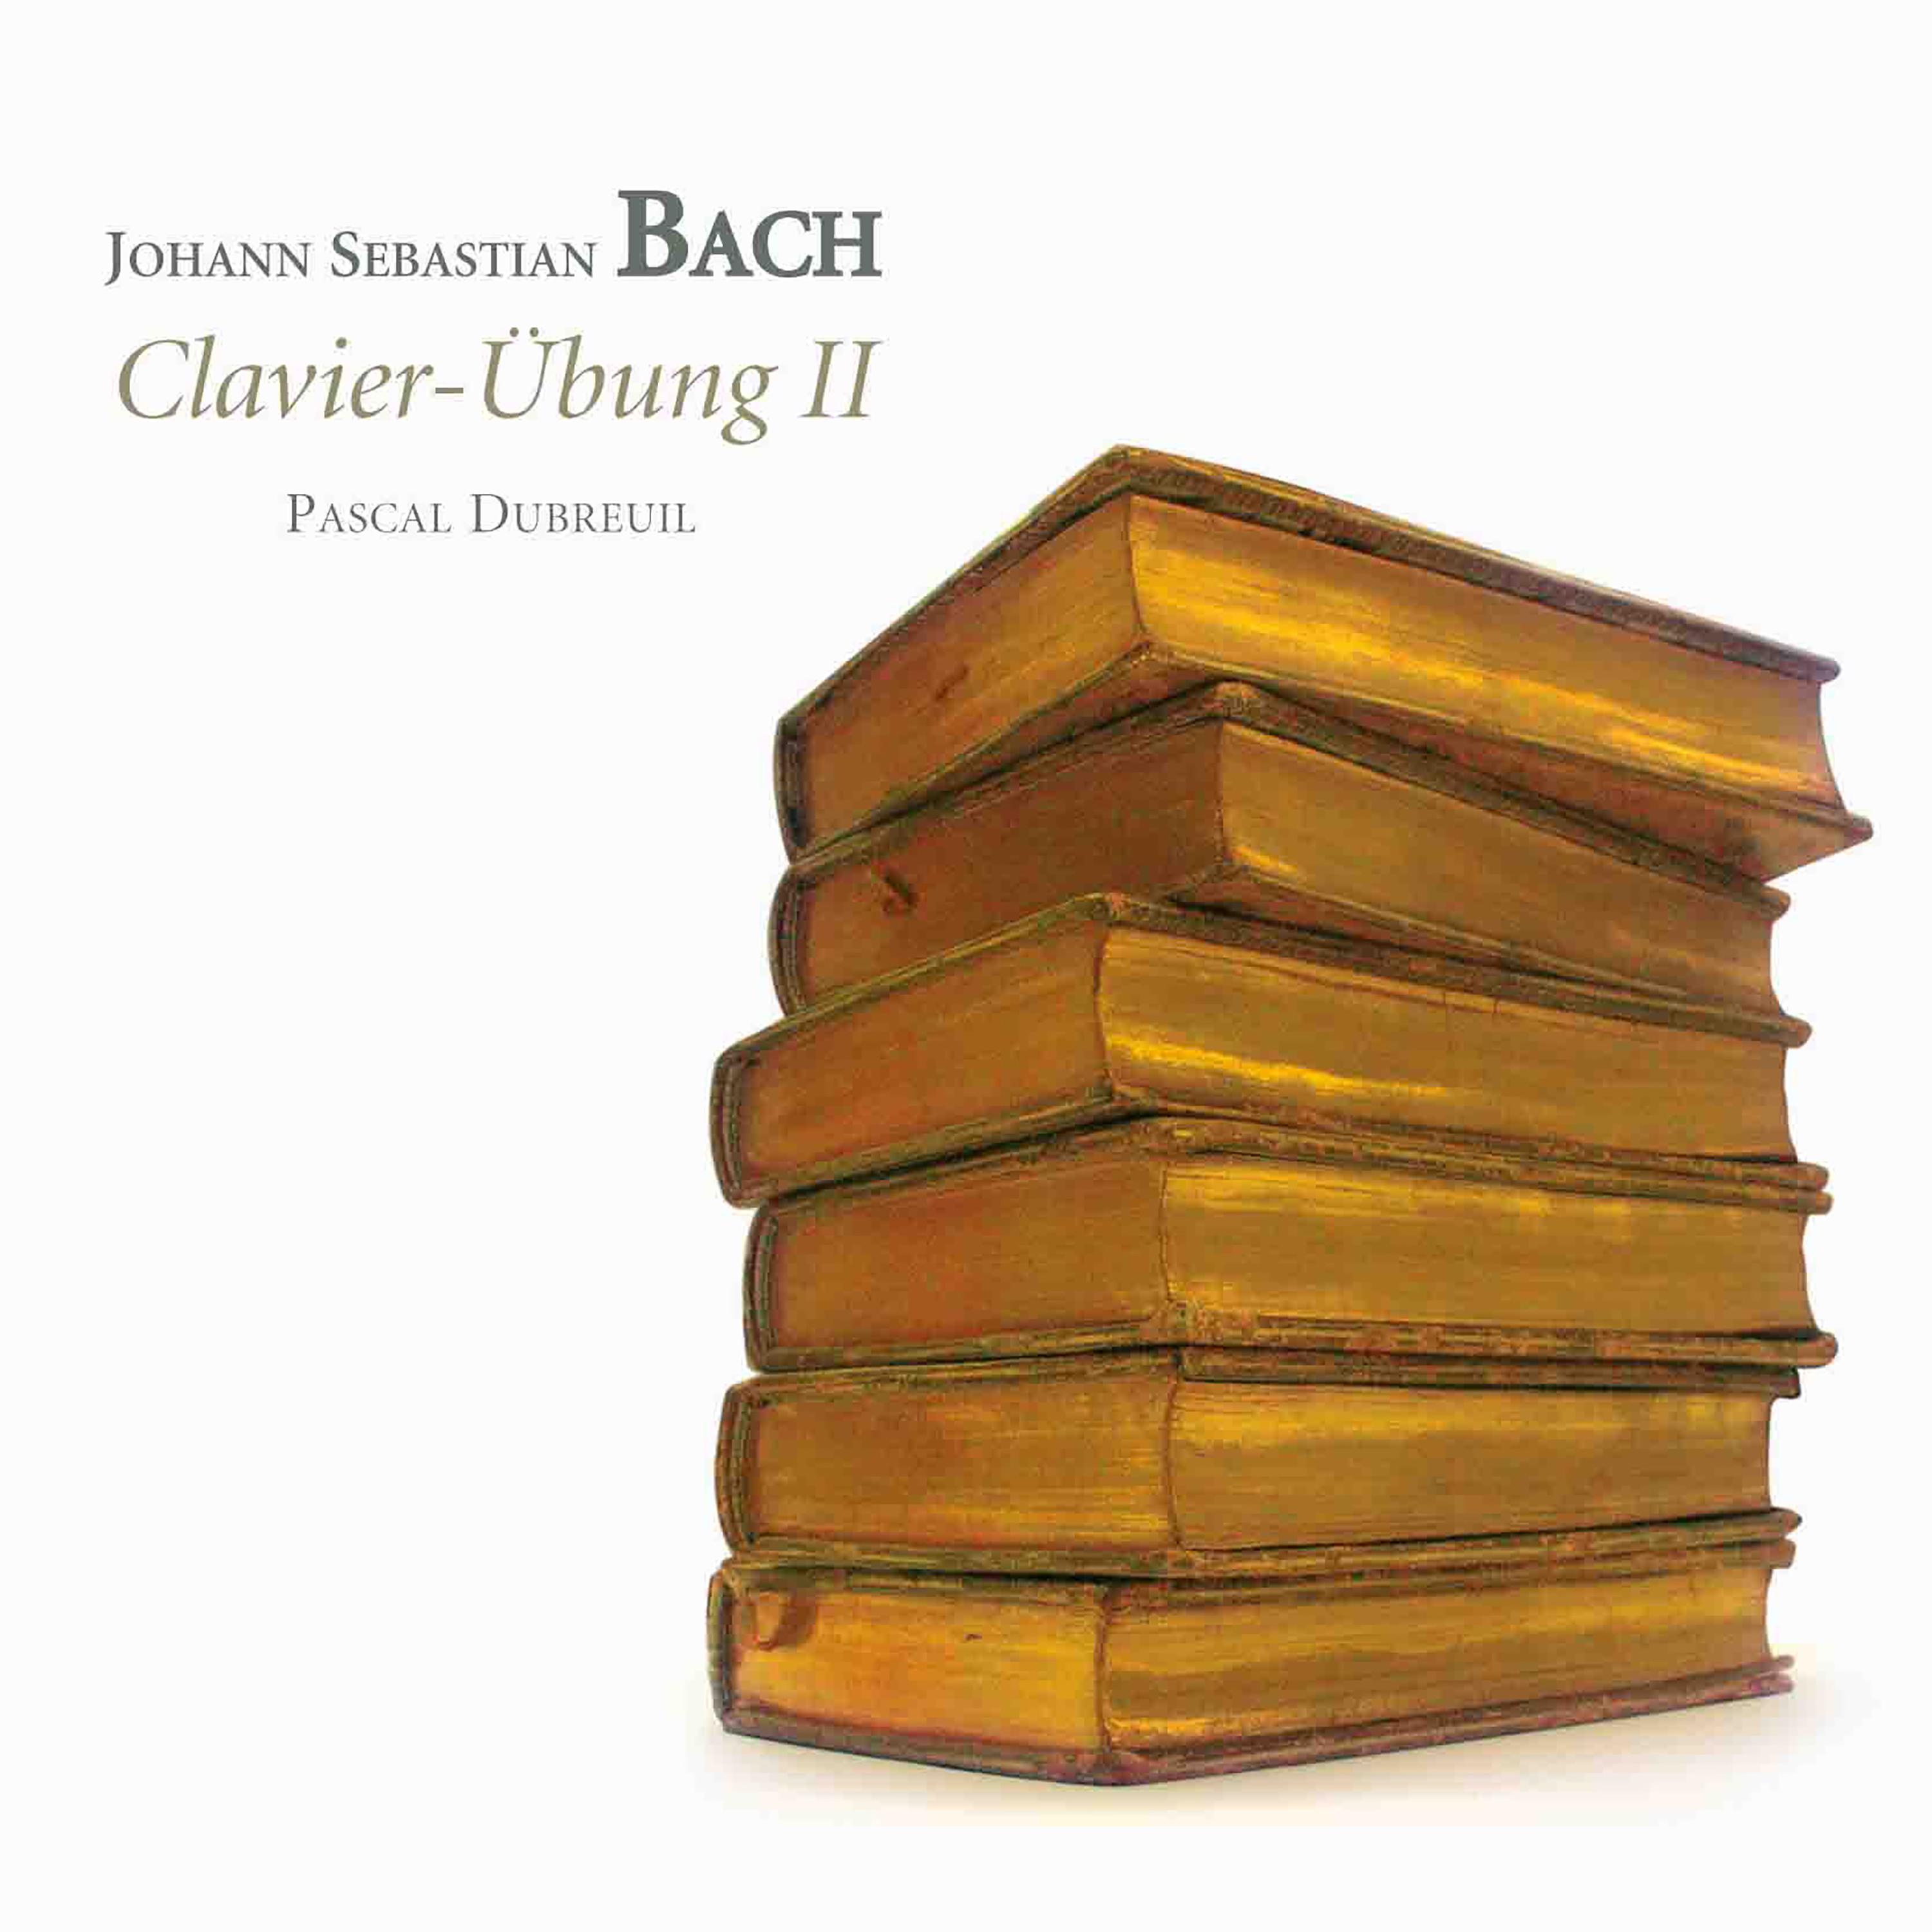 Pascal Dubreuil - Chromatic Fantasy and Fugue in D Minor, BWV 903: II. Fuga